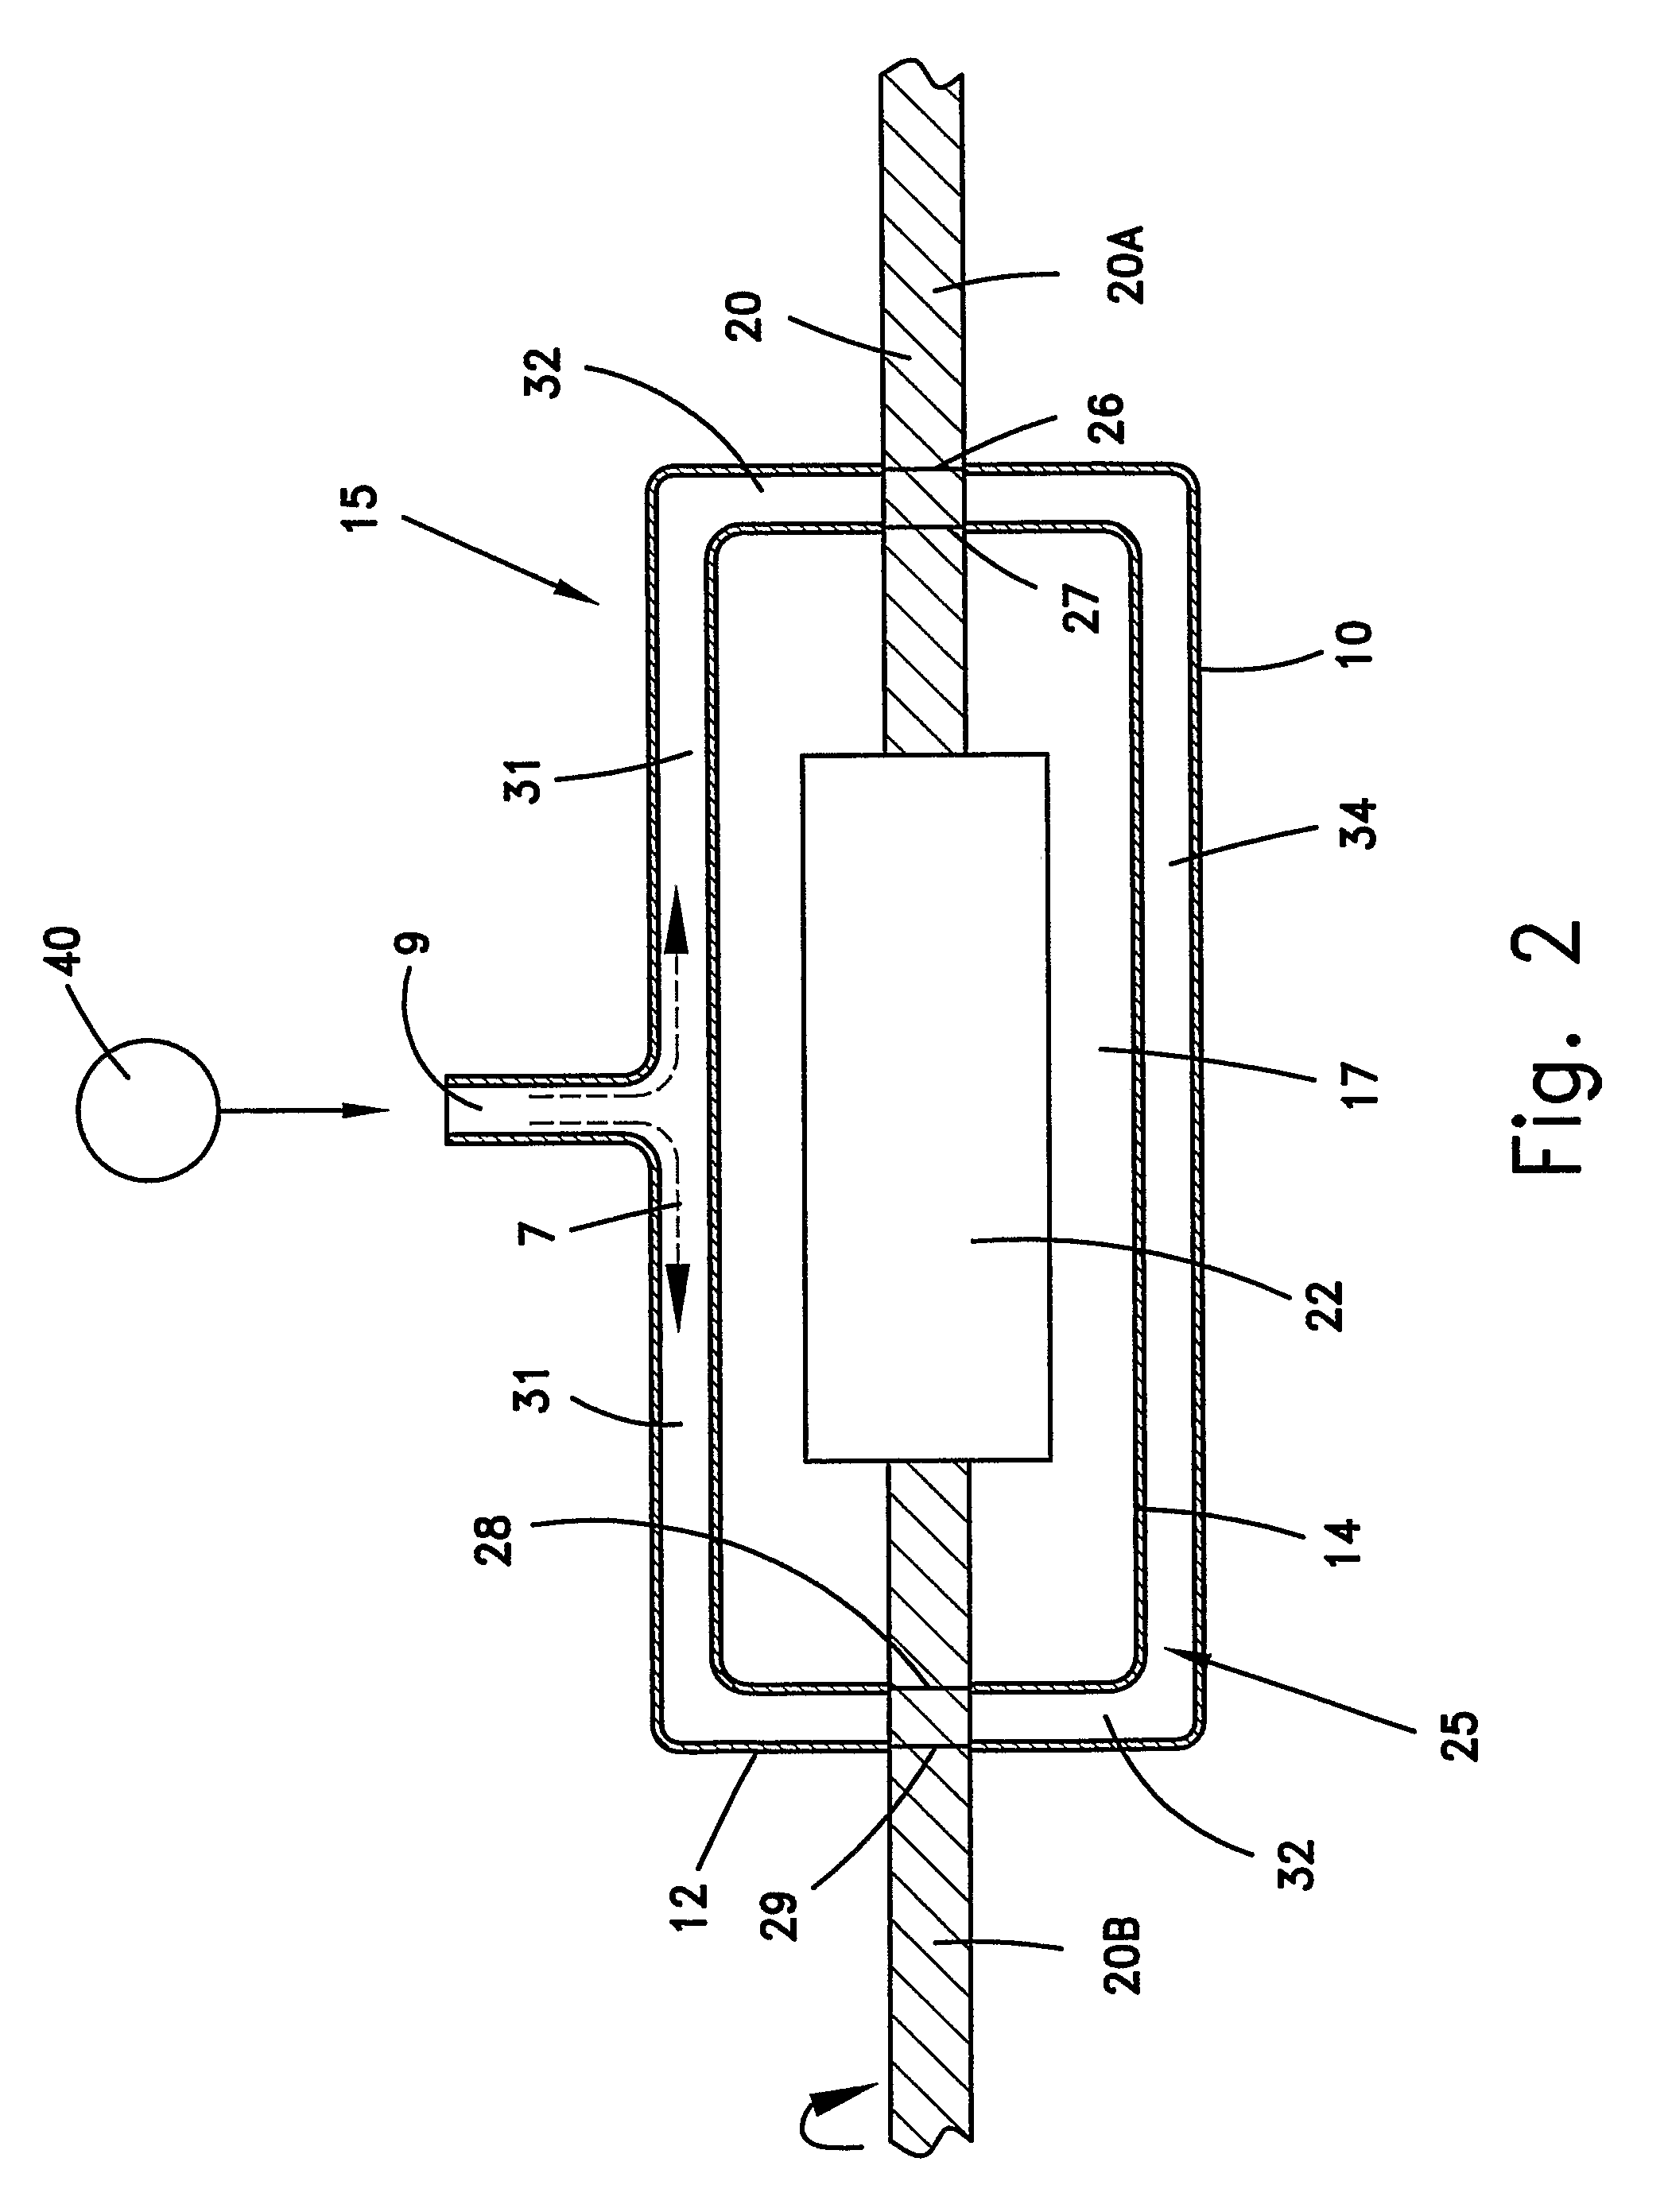 Apparatus for delivering sealant at a predetermined pressure to a stuffing box of a shaft